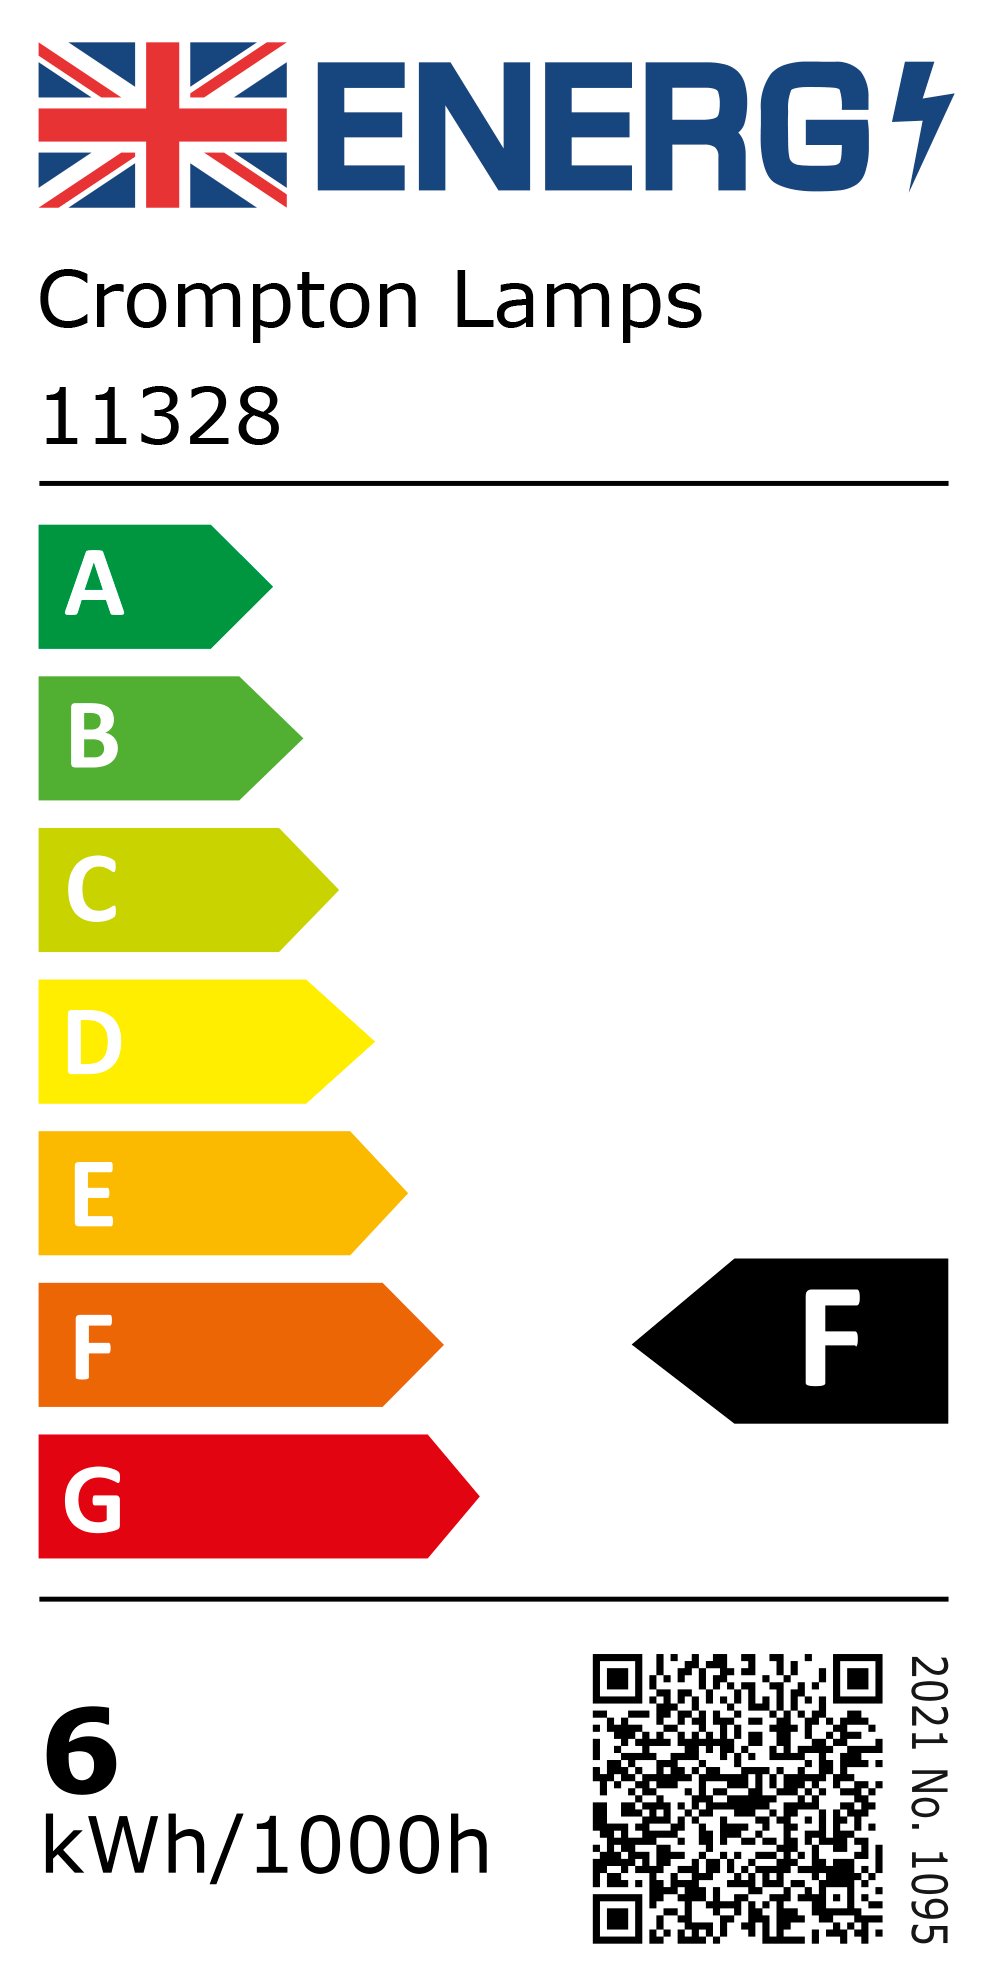 New 2021 Energy Rating Label: Stock Code 11328